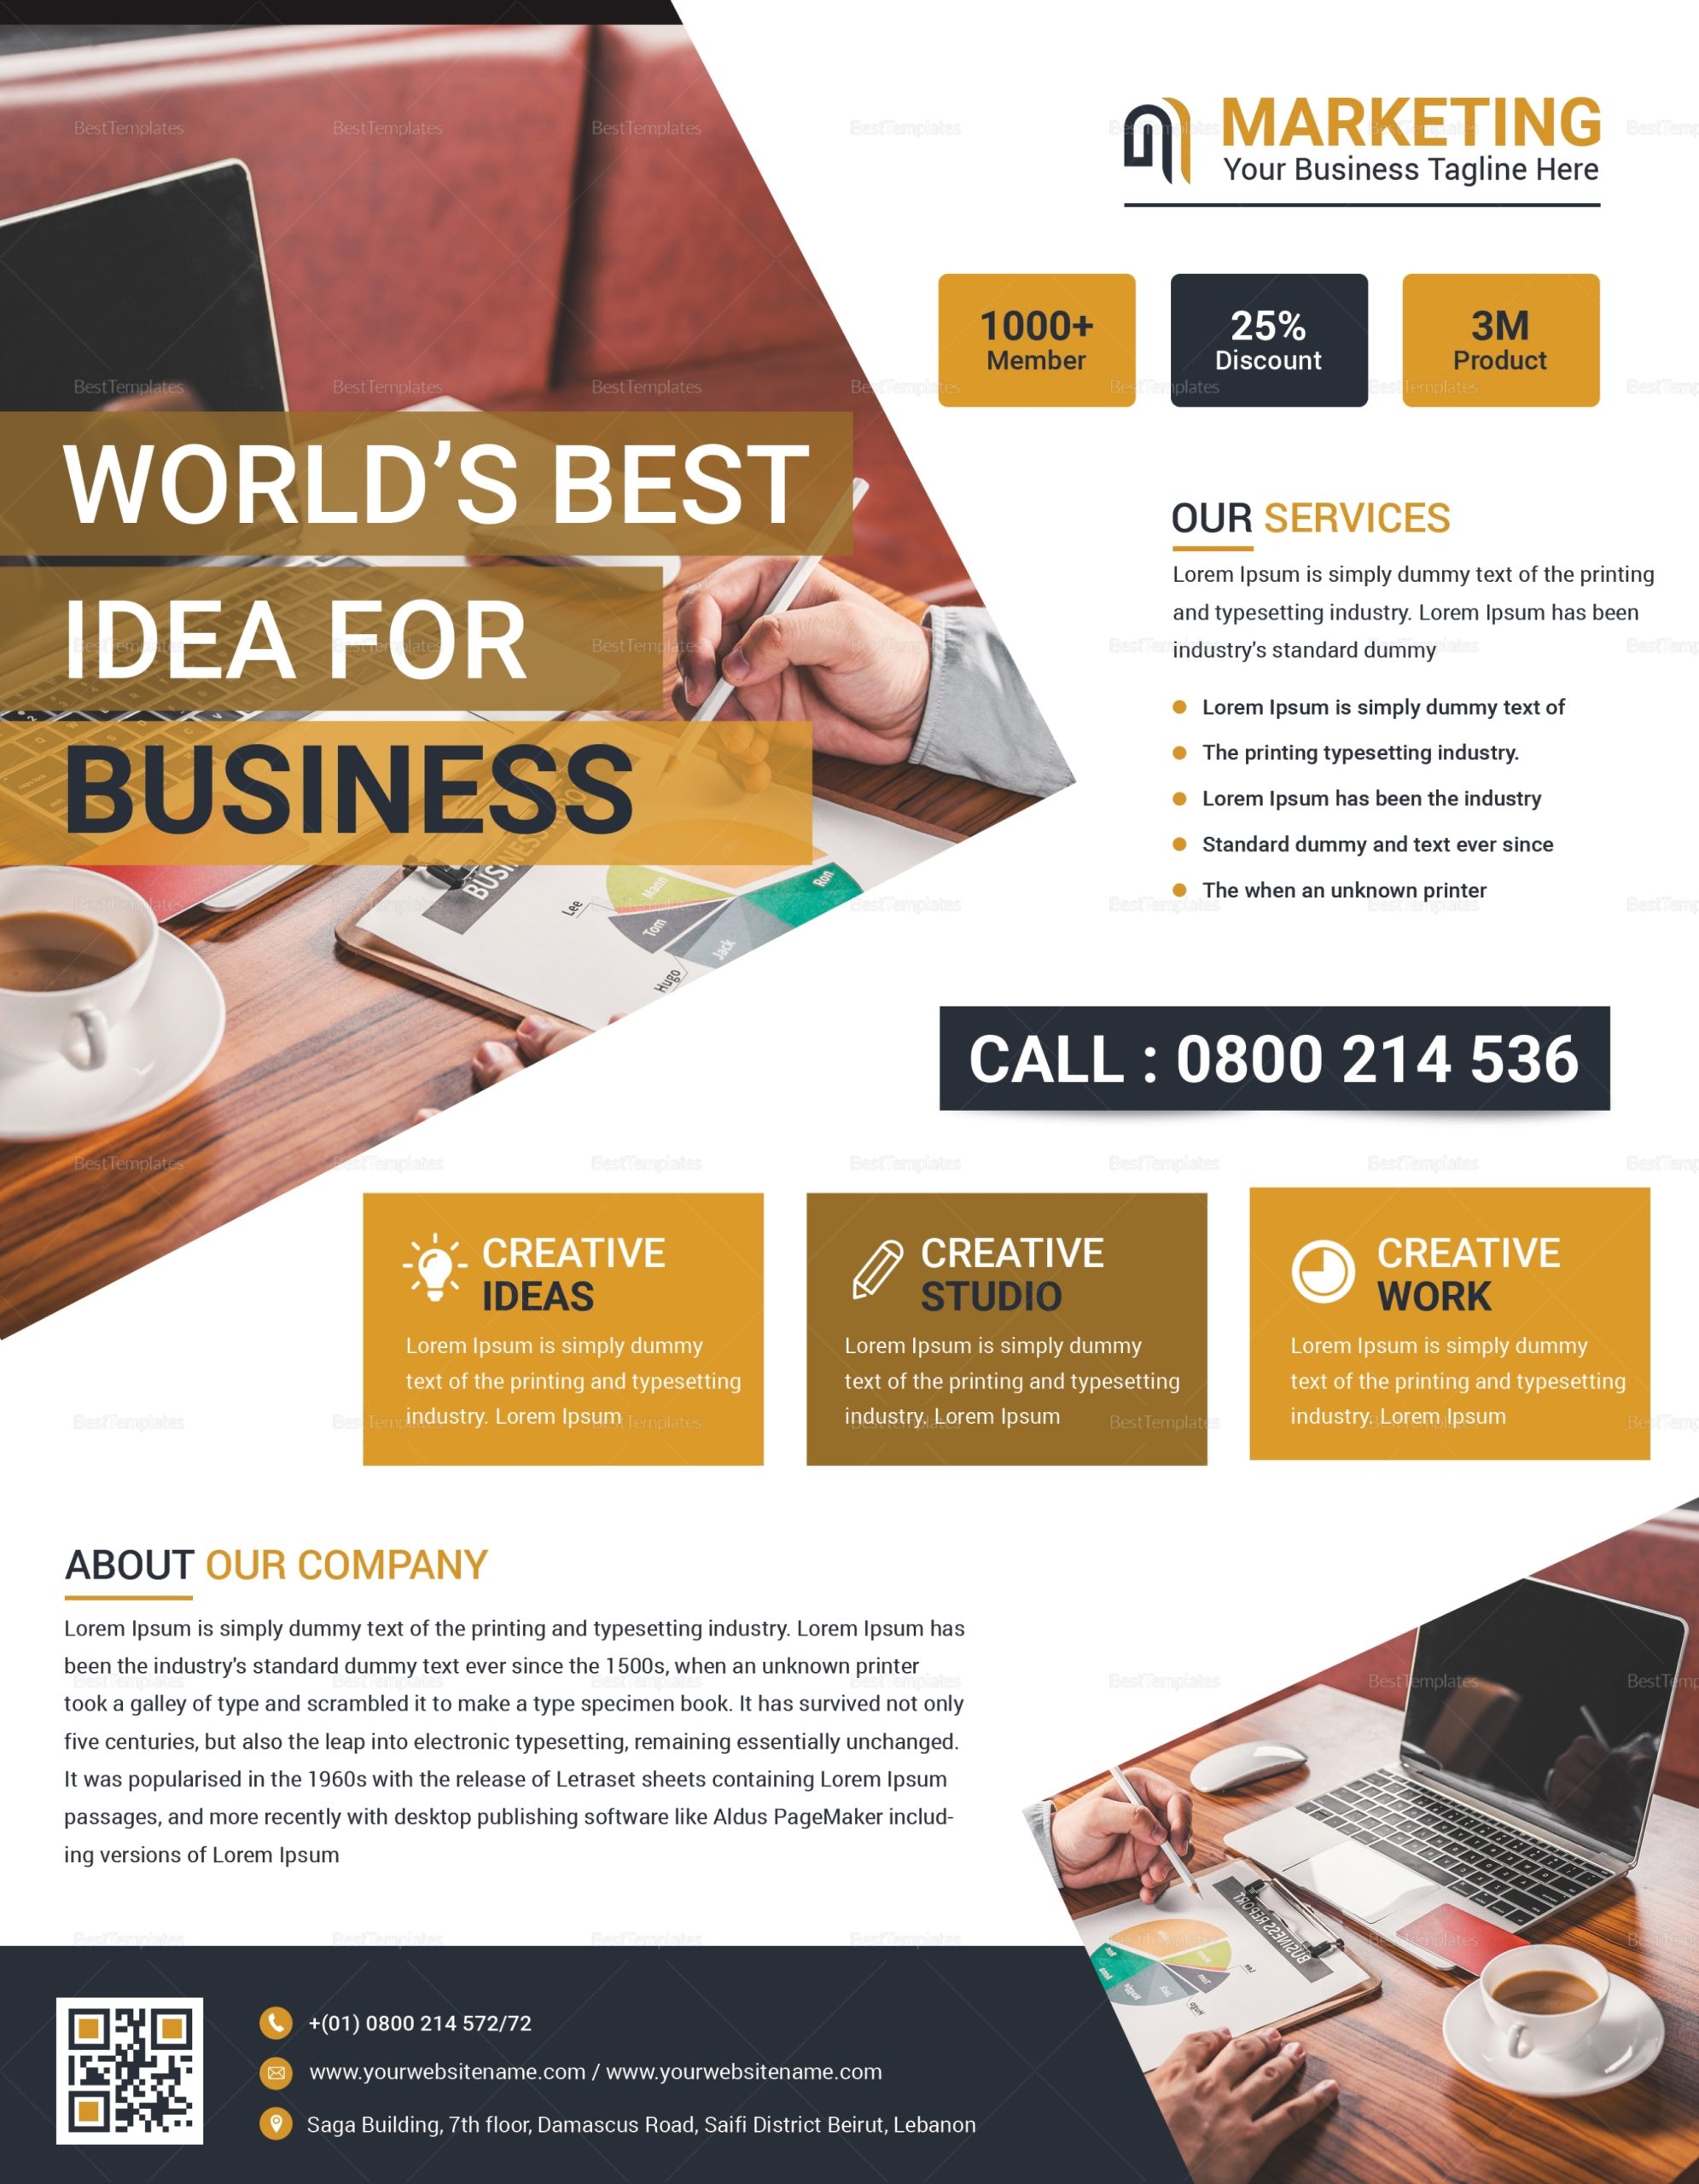 Business Marketing Flyer Design Template In Word, Psd, Publisher within Business Flyer Templates Free Printable